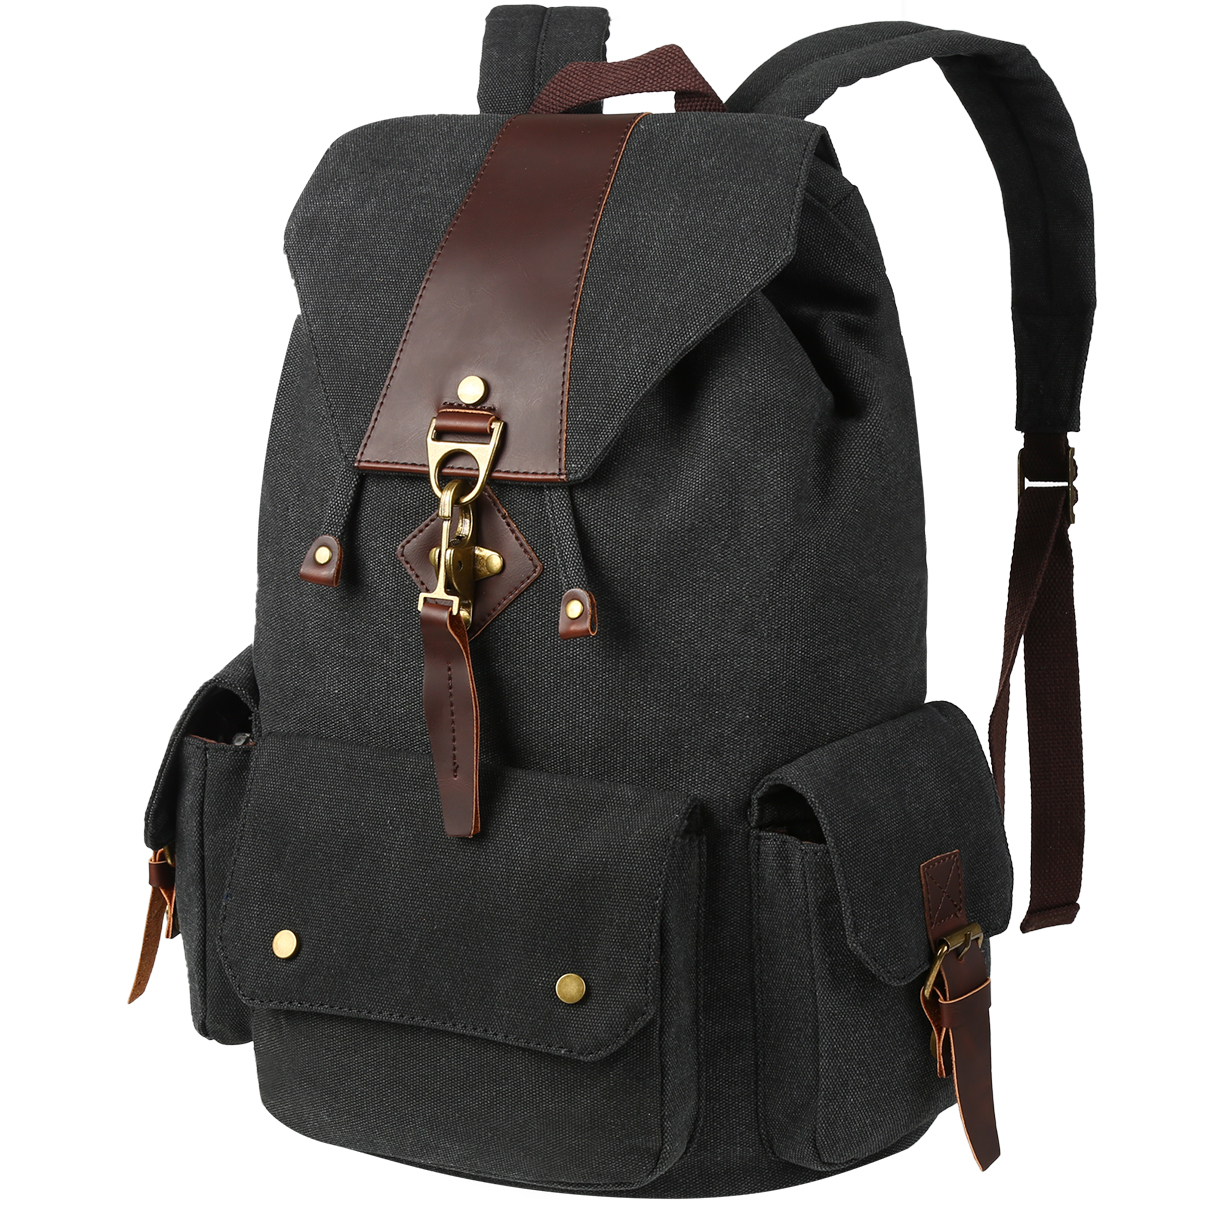 Canvas Backpack Casual Shoulder Bag Large Capacity Travel Daypack for Men and Women - image 1 of 8